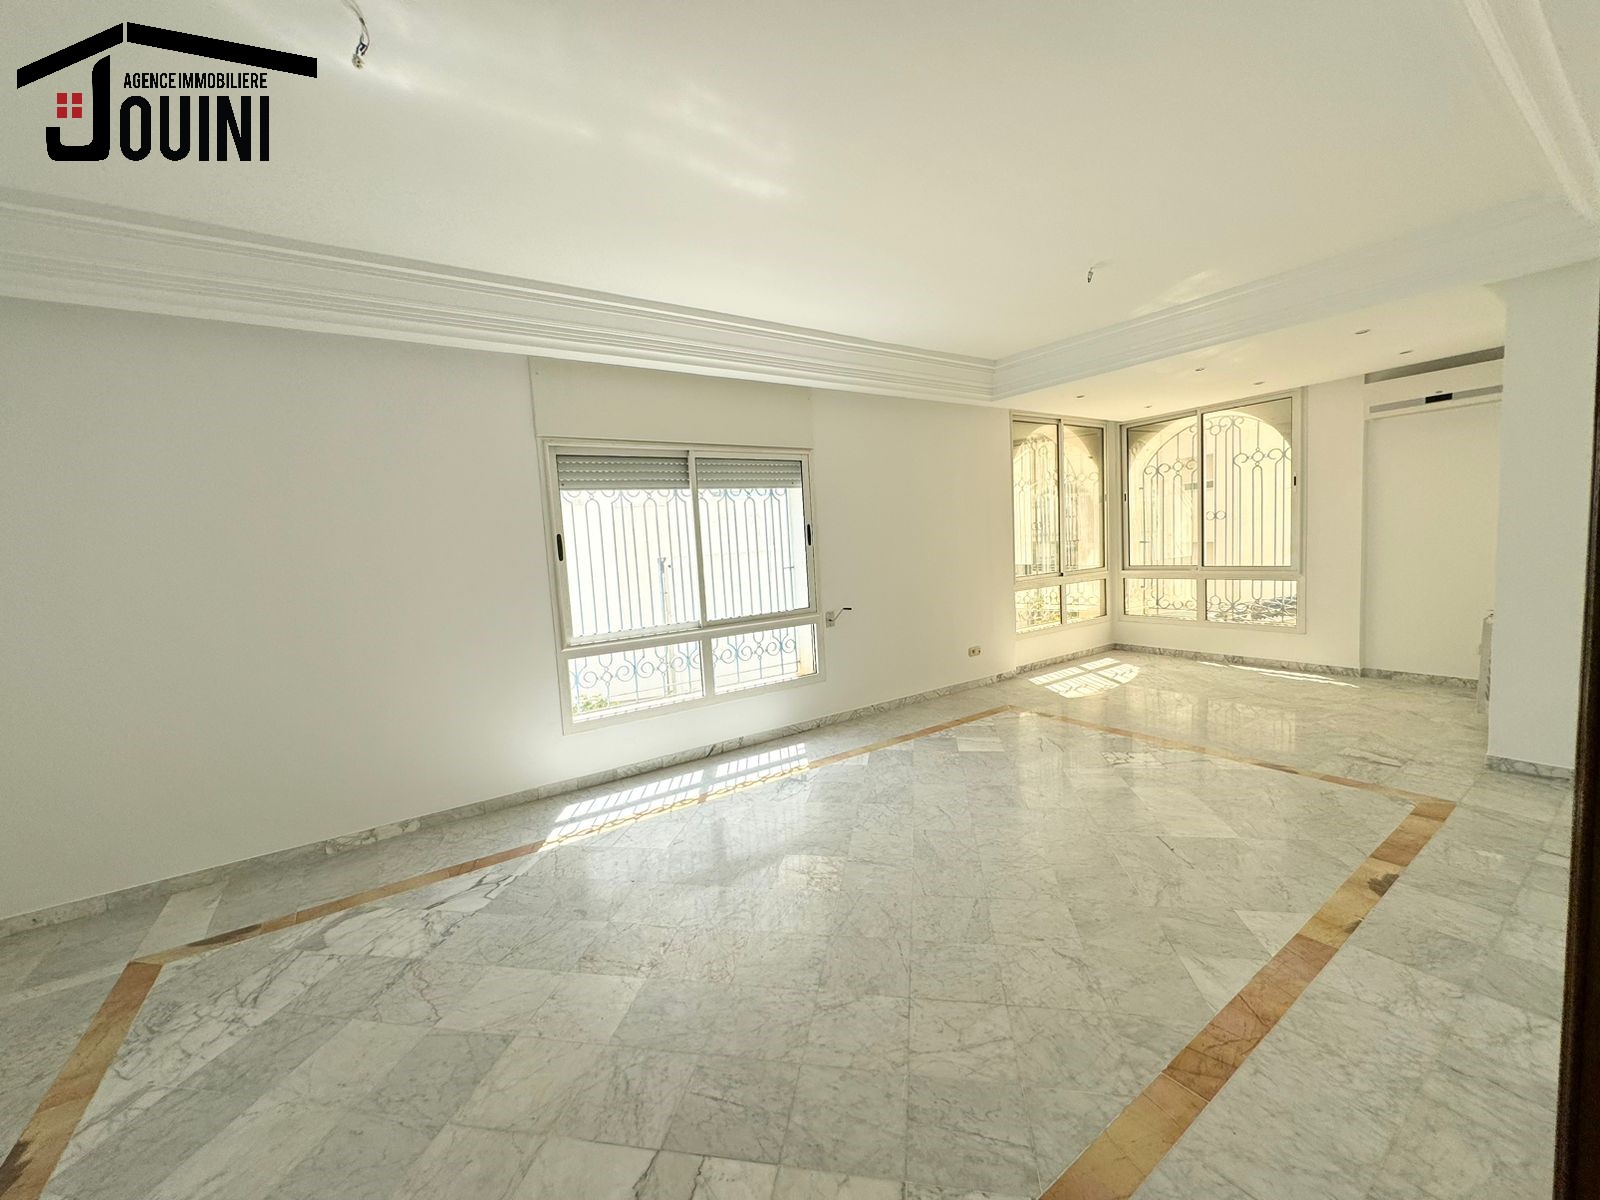 Ariana Ville Centre Commercial Ikram Vente Appart. 3 pices Appartement s3 a cite ennasr